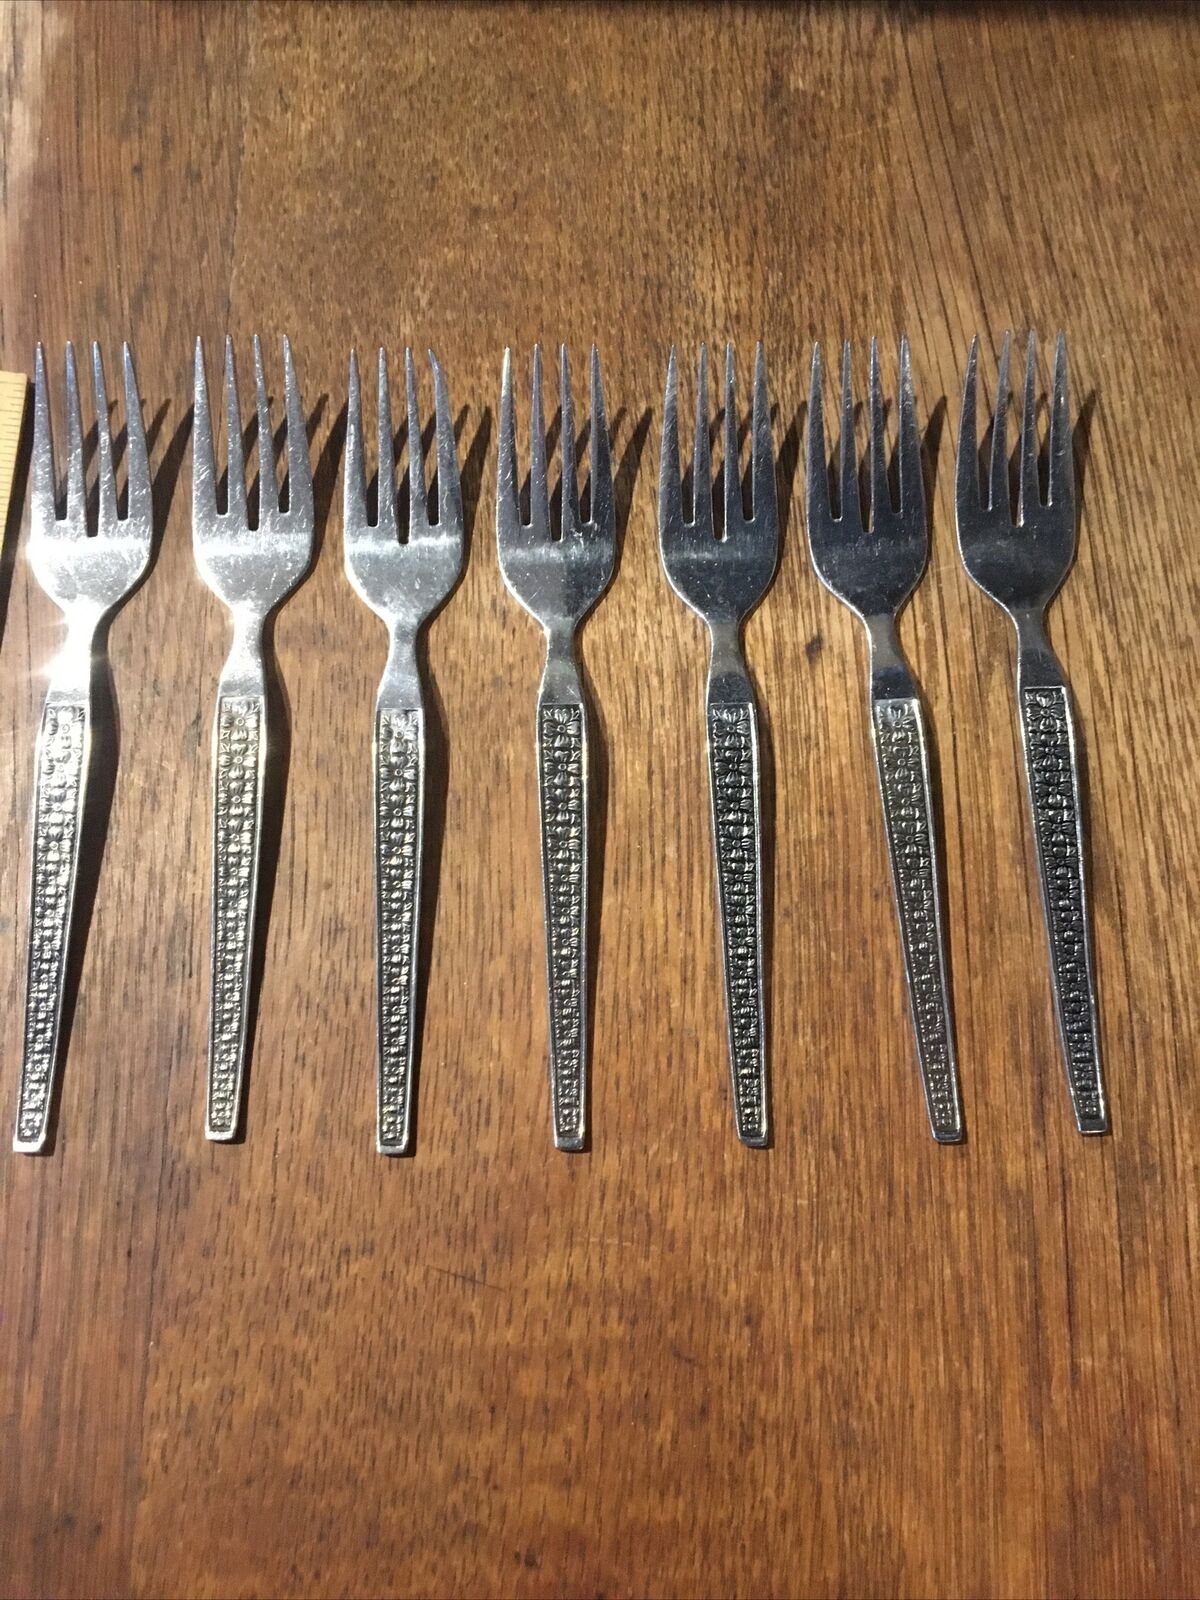 Vintage Stainless Taiwan Flatware Floral Pattern 7 Piece Fork Set